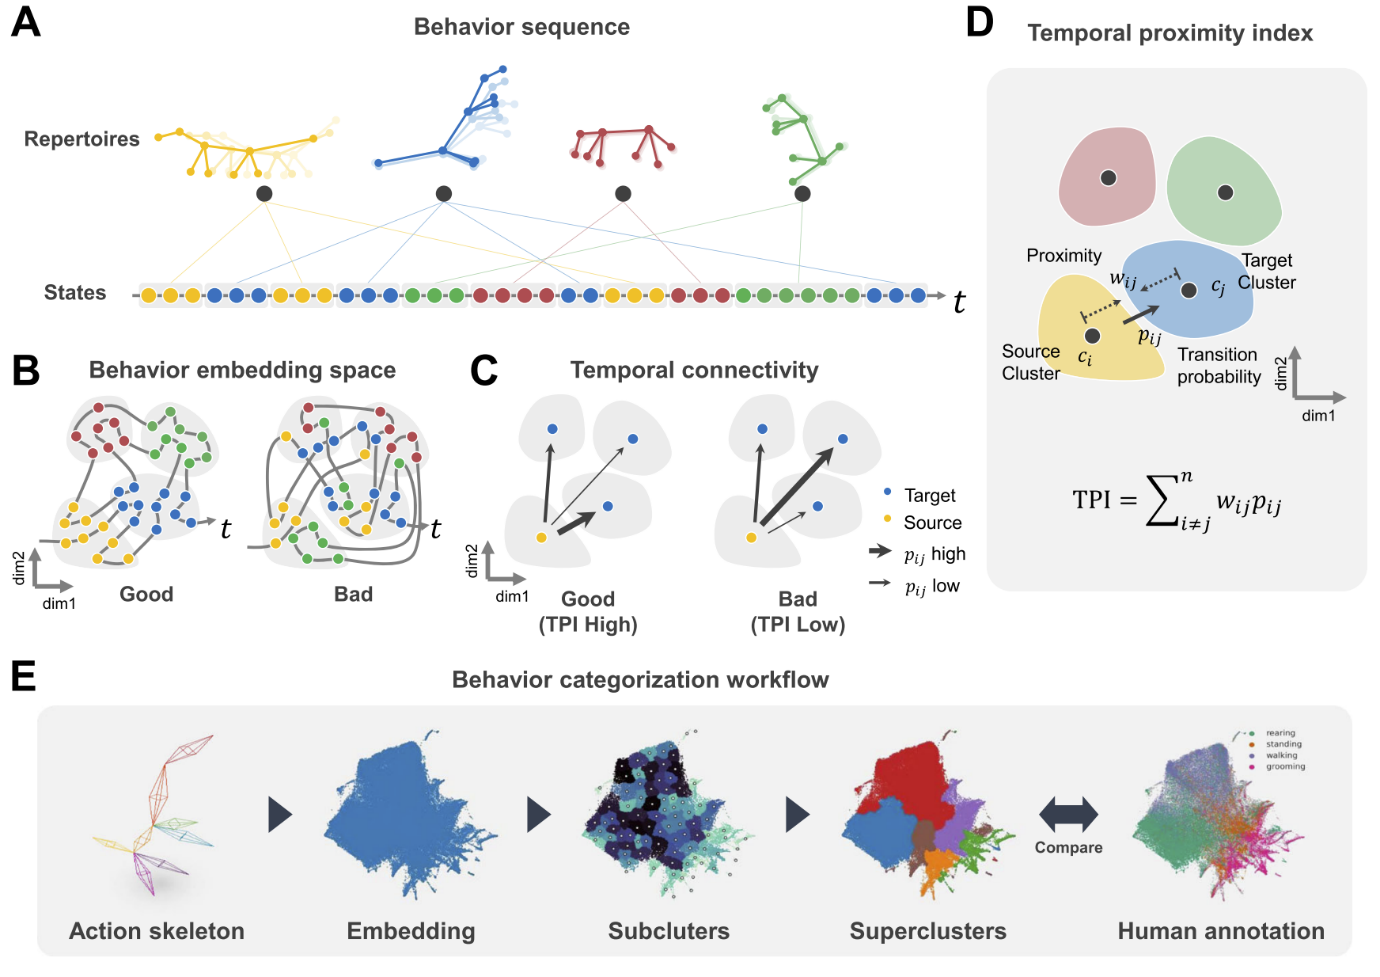 Figure 1. Proposing a new behavior embedding evaluation metric: TPI (Temporal Proximity Index)
(A) Displays the movement of a mouse's 3D action skeleton over time, with each color representing a standardized behavior repertoire (e.g., walking, standing).
(B) Once the behavior embedding space is created, examining the movement patterns over time can verify the quality of the embedding. A good embedding space has clusters that contain the same behavior states, showing efficient temporal movement, while a poor embedding space has clusters that contain different behavior states, resulting in inefficient temporal movement.
(C) The quality of temporal connectivity can be calculated by the total value of the product of transition probabilities between clusters and the distance between clusters (TPI). (Left) Frequent transitions to nearby clusters indicate good temporal connectivity. (Right) Few transitions to nearby clusters indicate poor temporal connectivity.
(D) Calculation method of the Temporal Proximity Index (TPI) for evaluating the temporal connectivity of the behavior embedding space.
(E) Workflow for unsupervised animal behavior analysis.